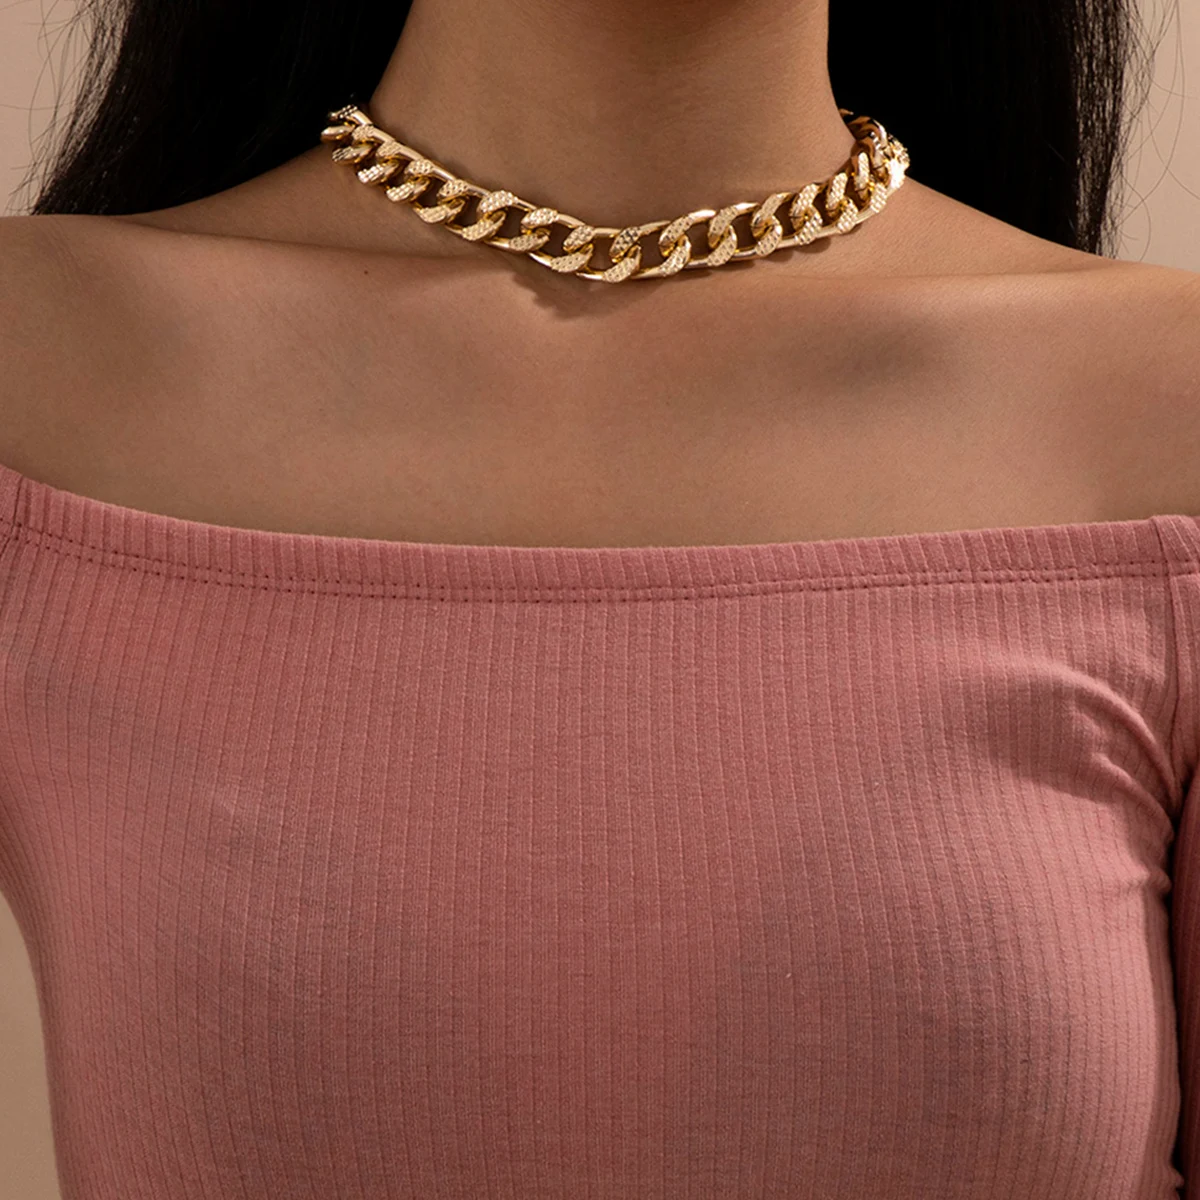 

Lacteo Fashion Gold Silver Color Multi Layered Thick Chain Choker Necklaces For Women Men Punk Chunky CCB Chain Necklace Jewelry